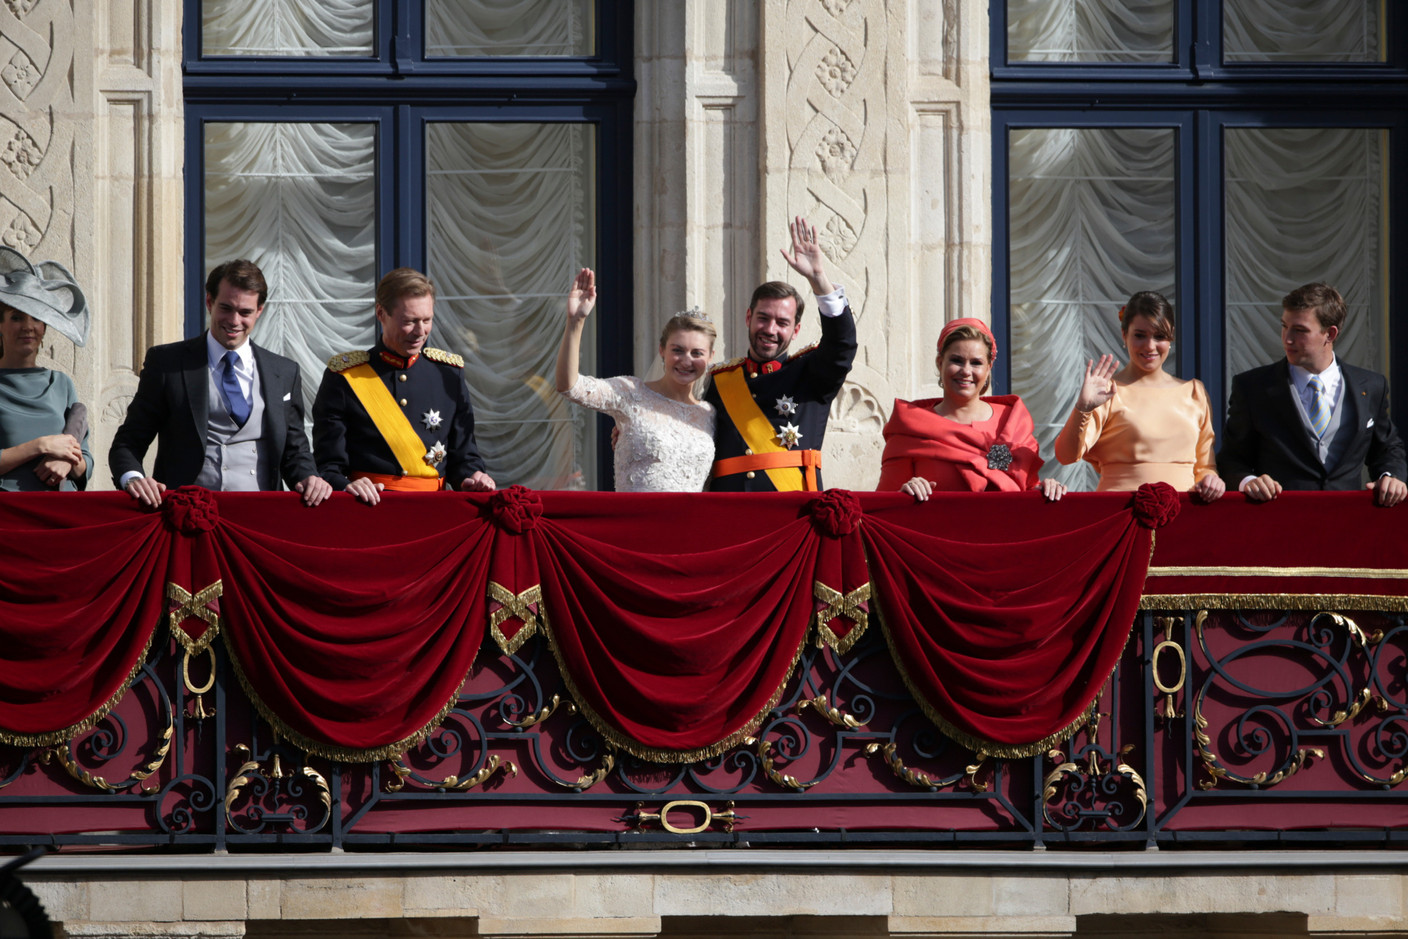 Crown prince Guillaume and princess Stéphanie greeting the public. Guy Wolff/Cour grand-ducale